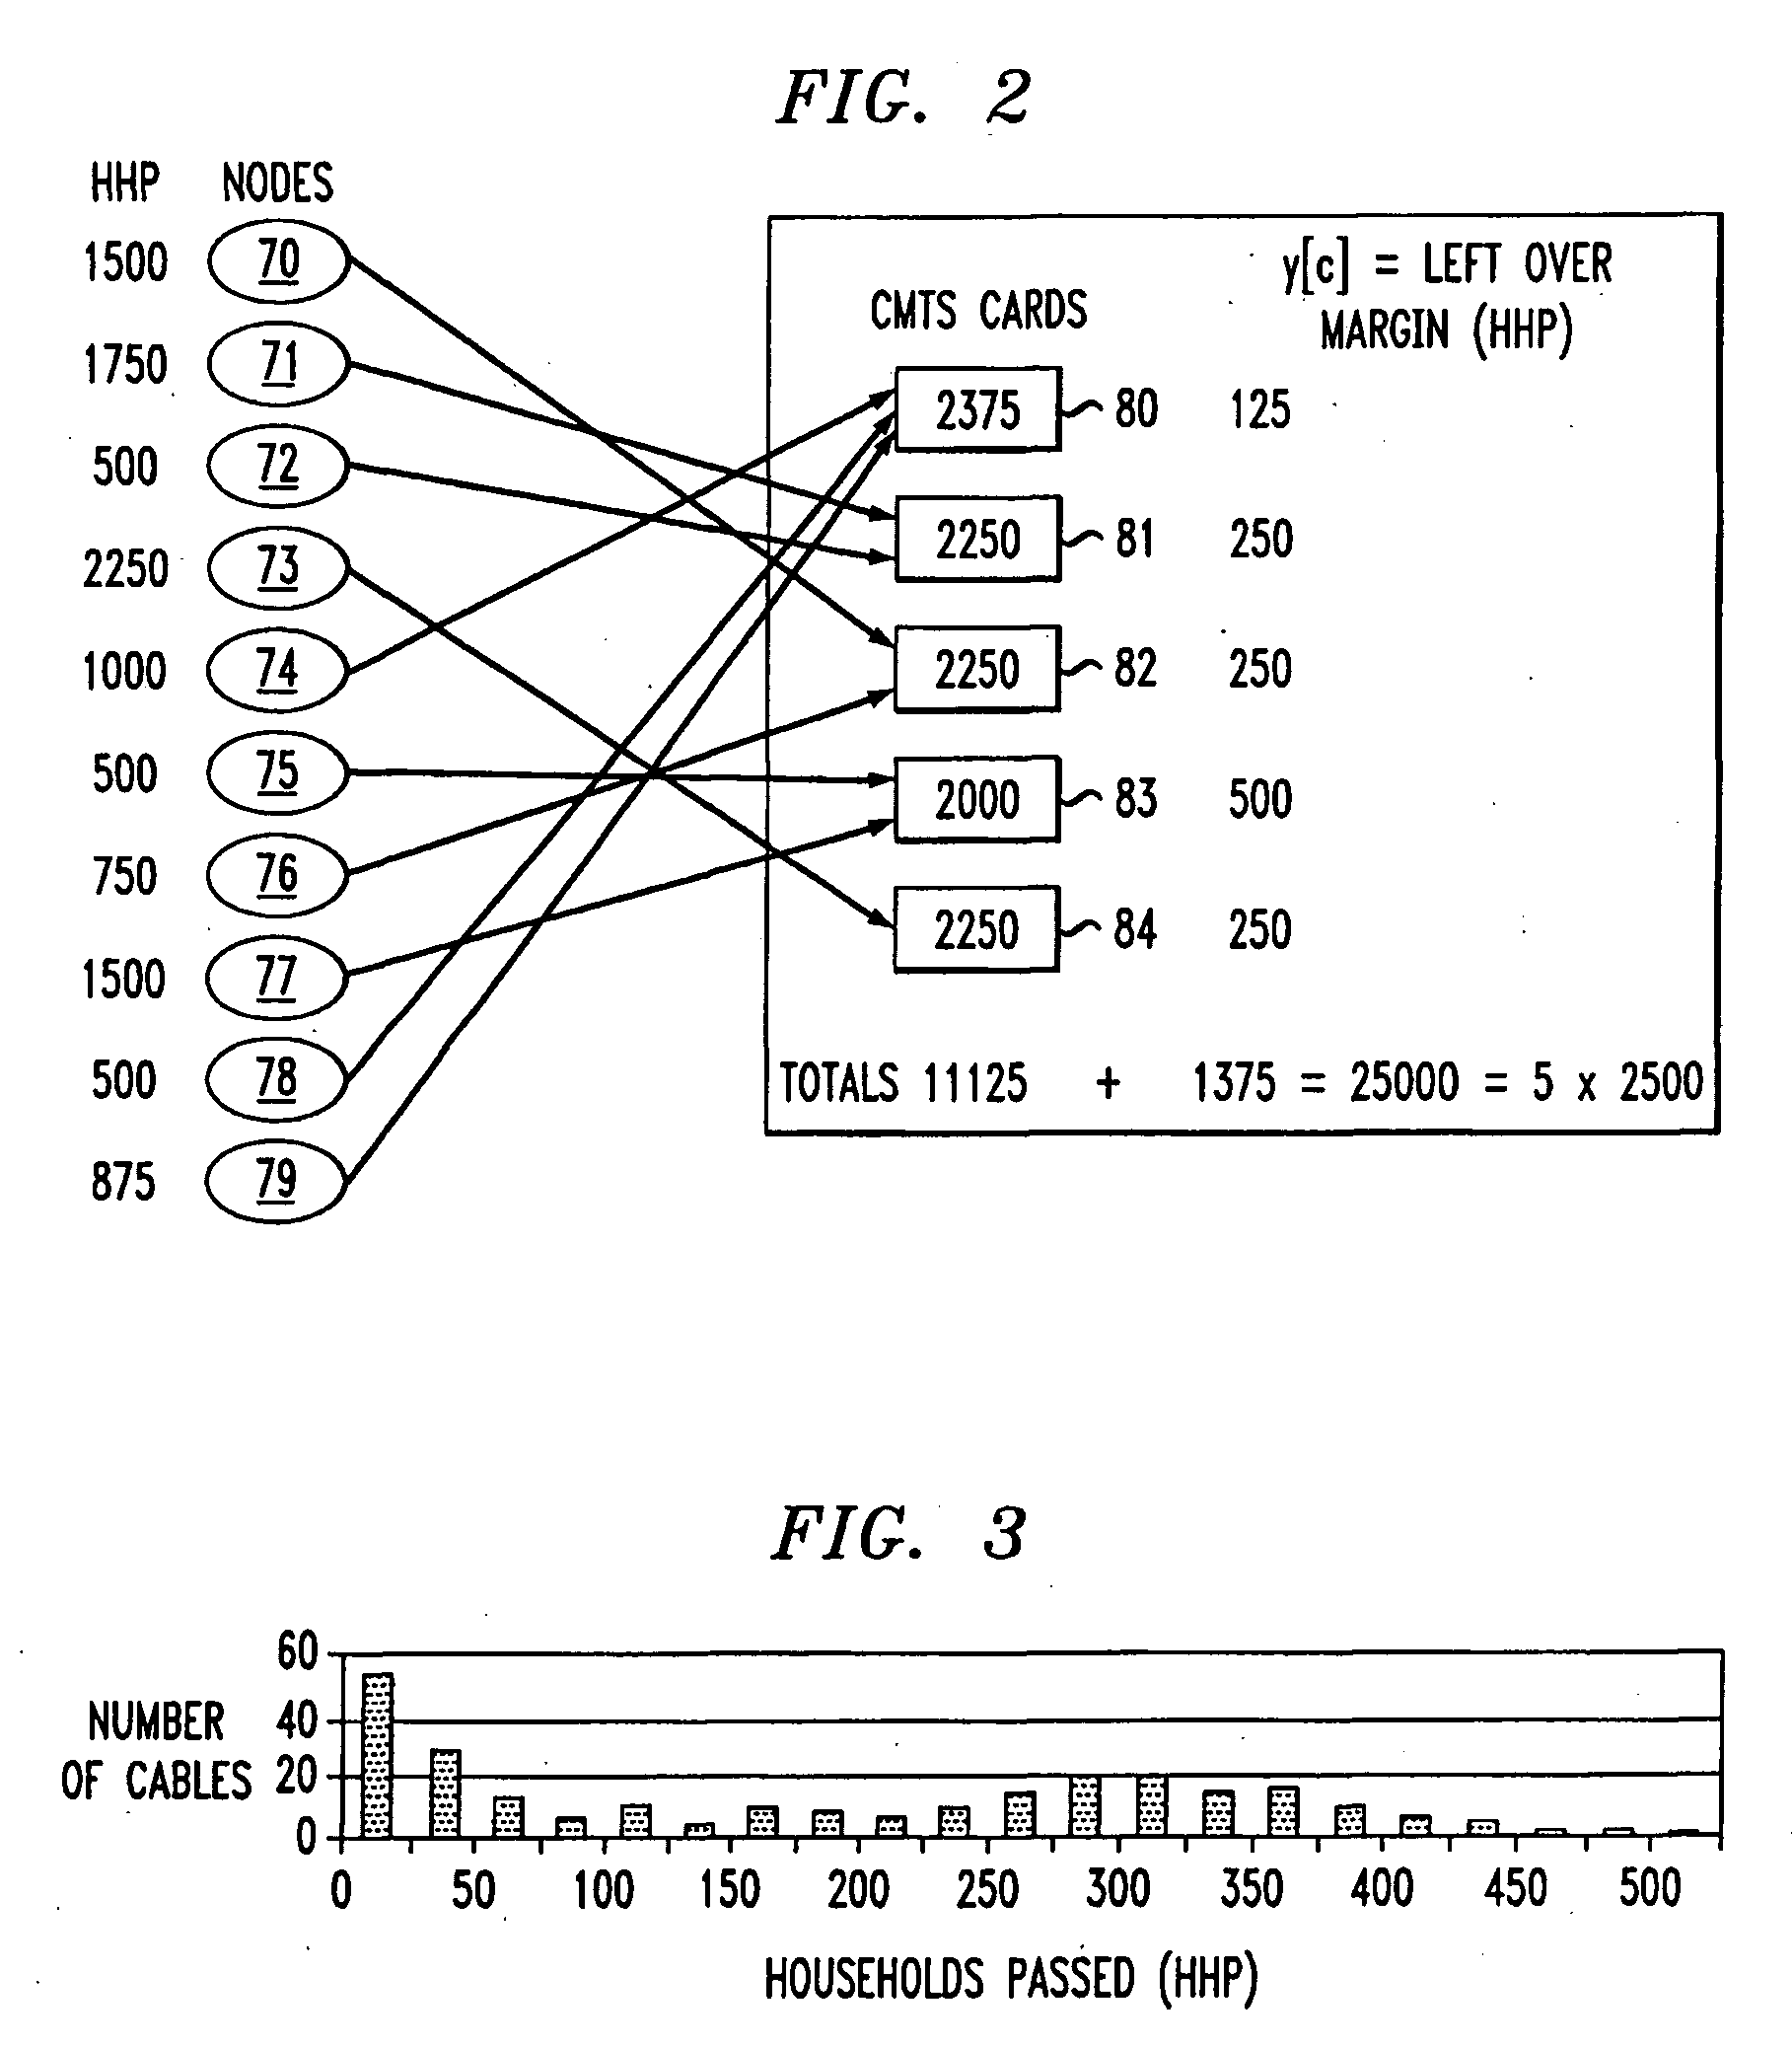 Method and apparatus for assigning communication nodes to CMTS cards